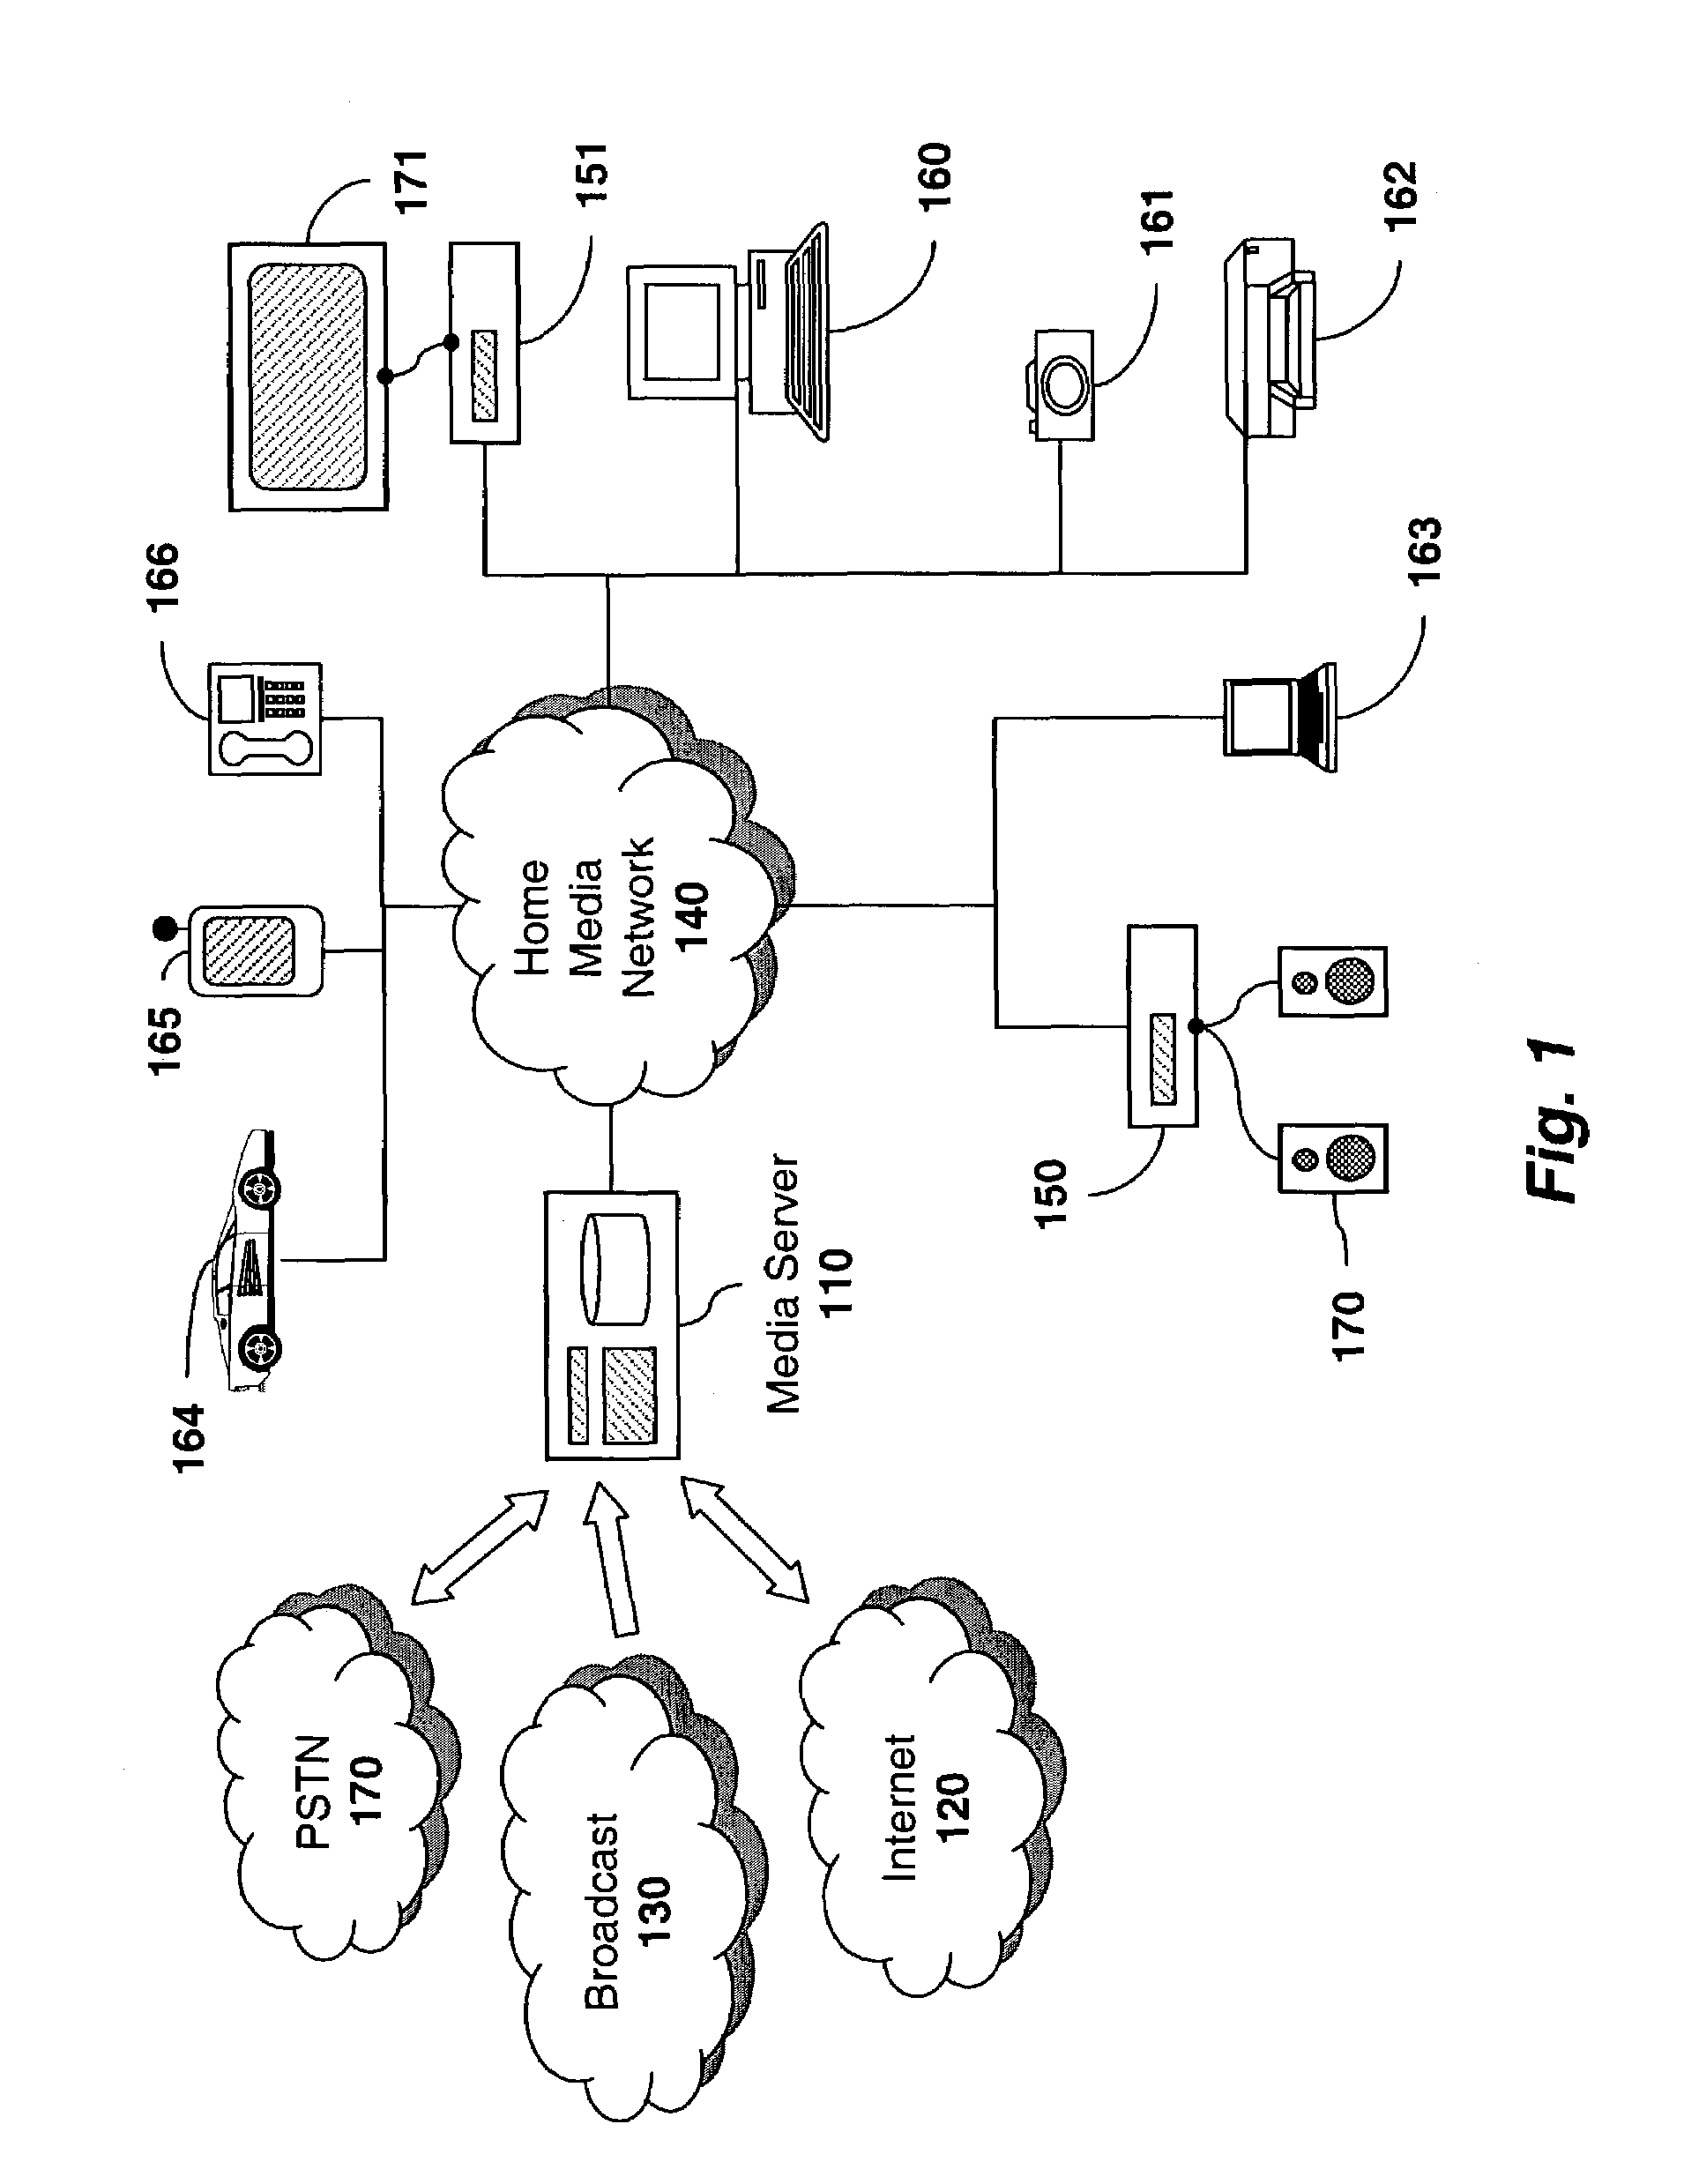 System and method for allocating resources across a plurality of distributed nodes